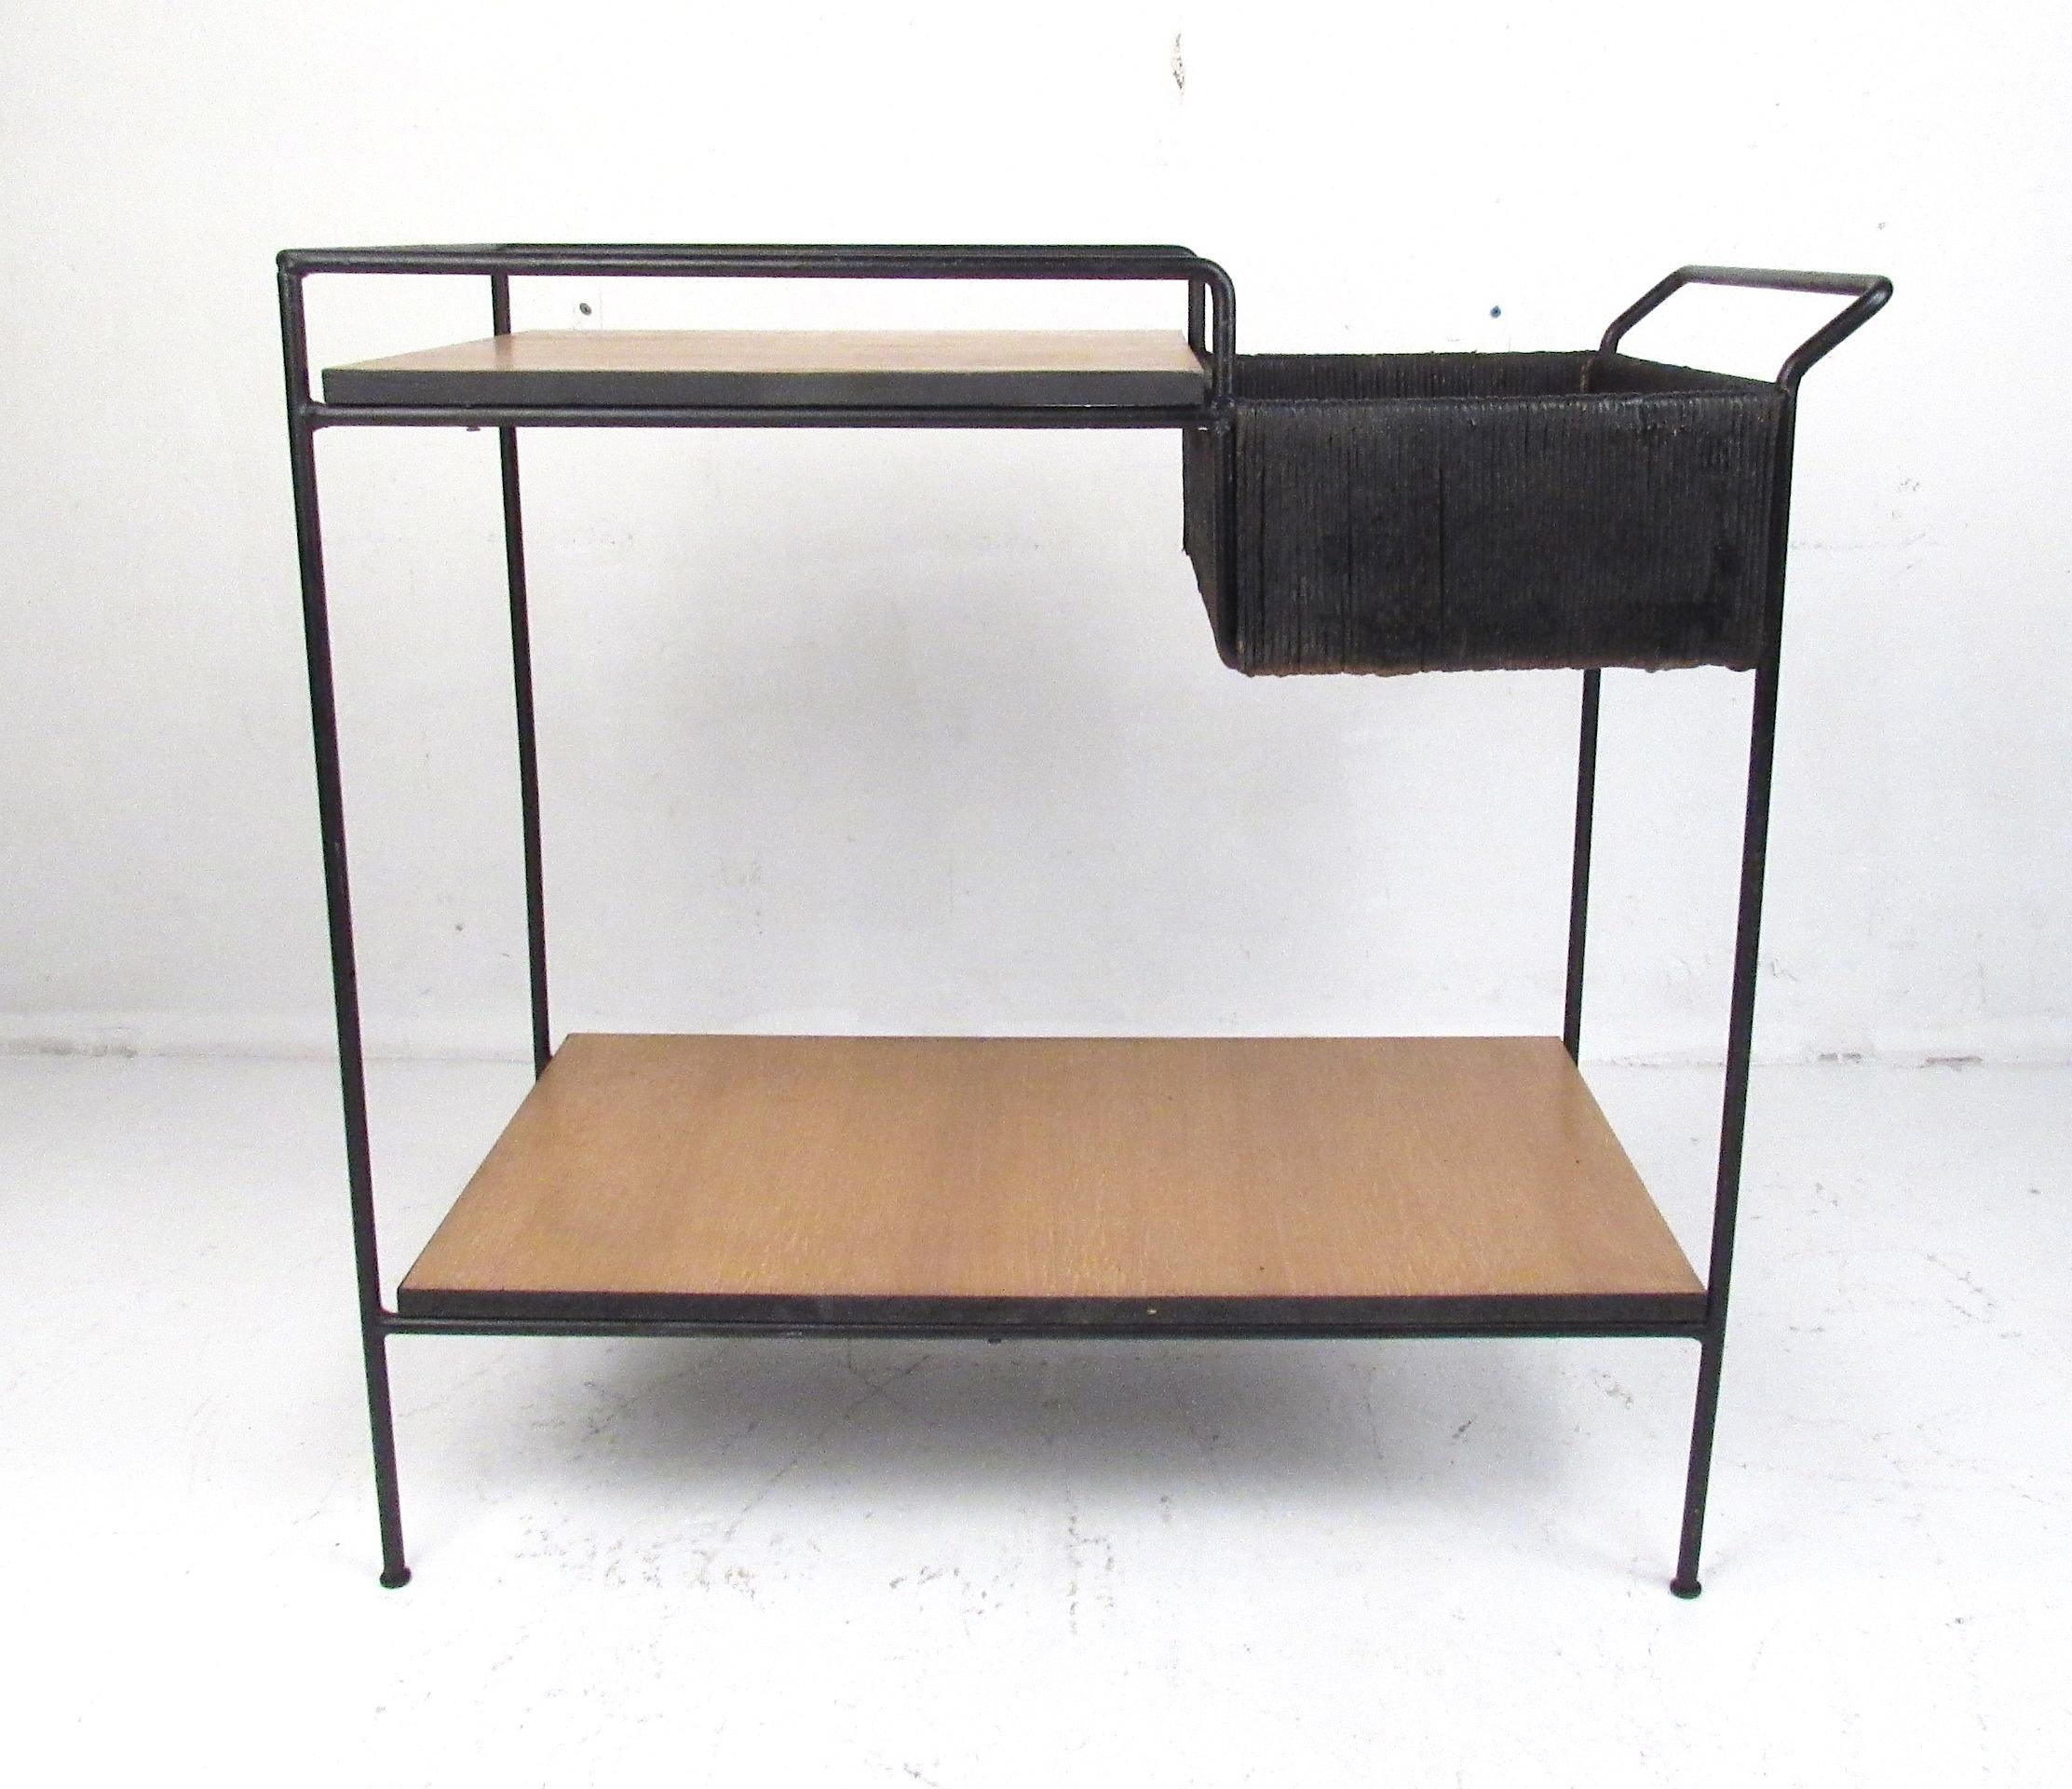 Classic bar cart by Arthur Umanoff iron frame with rush trim, circa 1950. Restoration recommended.
Please confirm item location (NY or NJ).